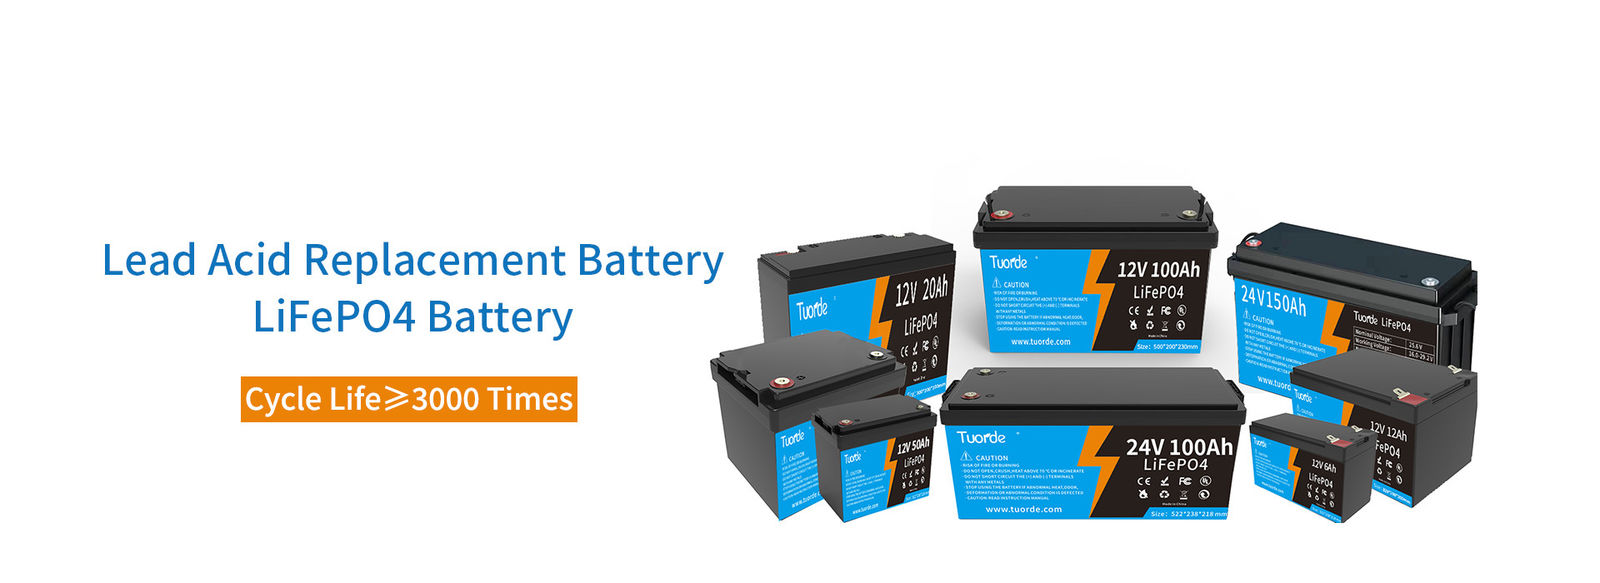 Lead Acid Replacement Battery